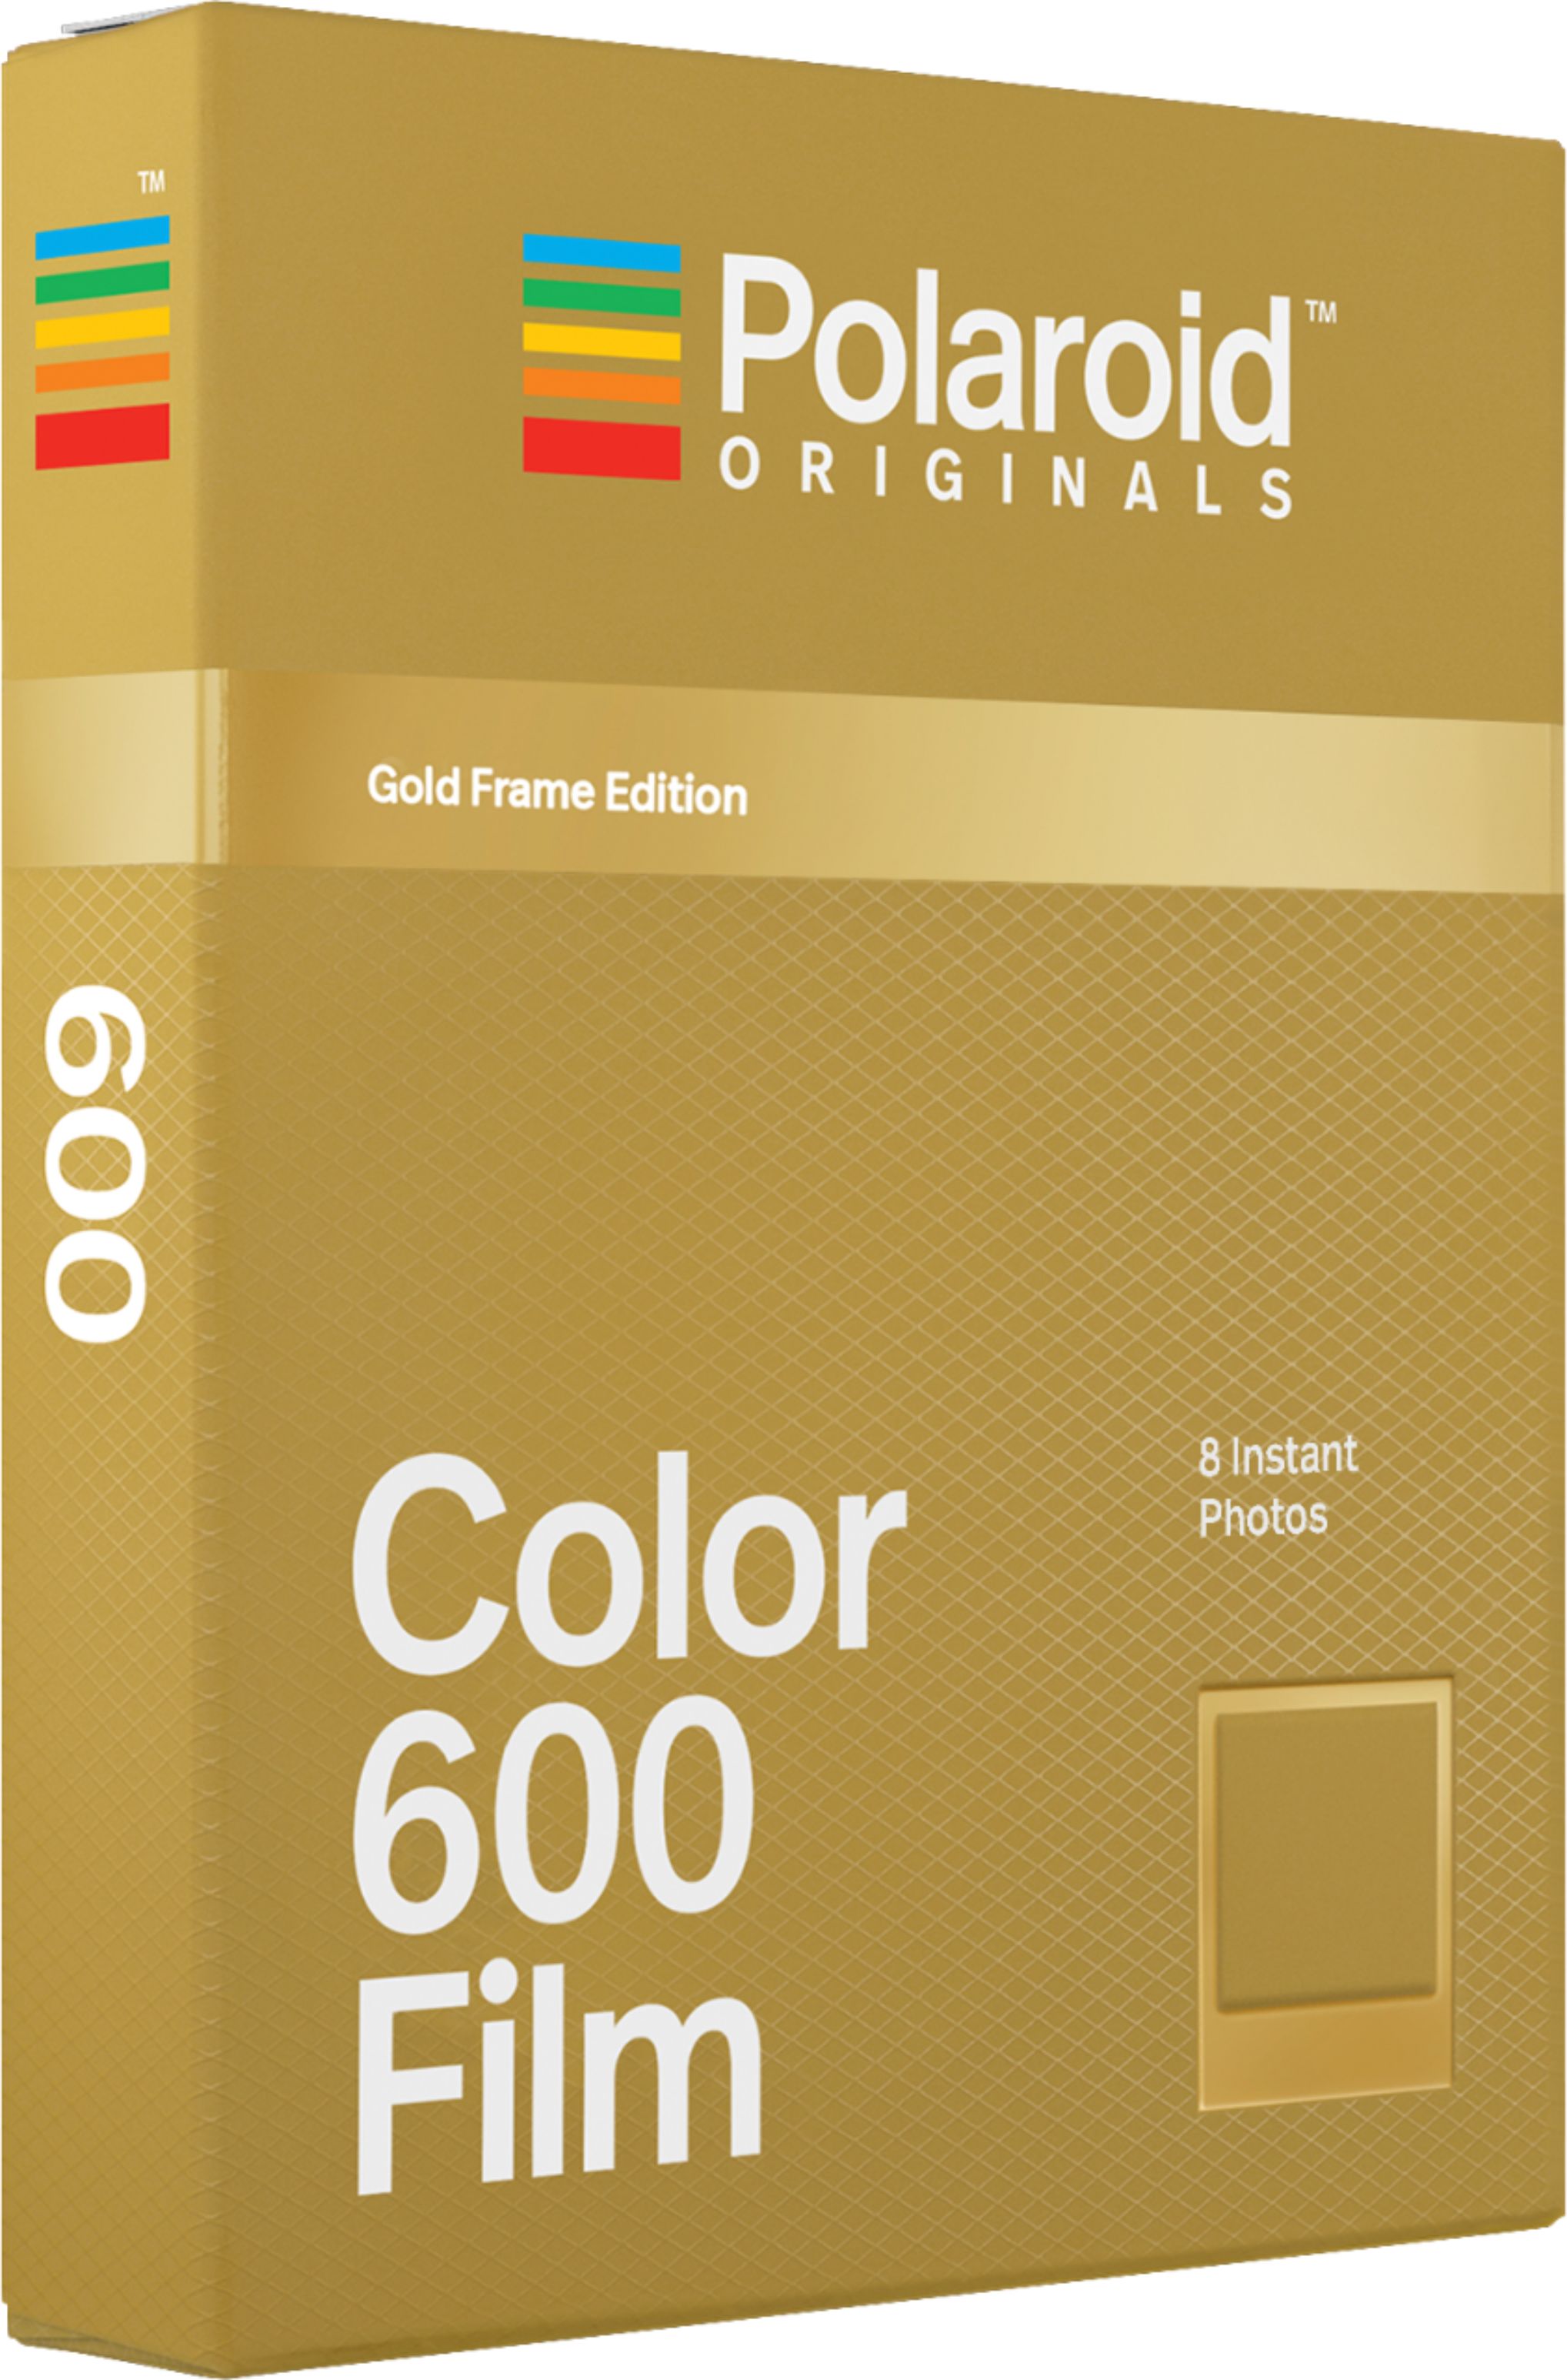 Polaroid Color 600 Film Different Colored Frames 4672 - Best Buy